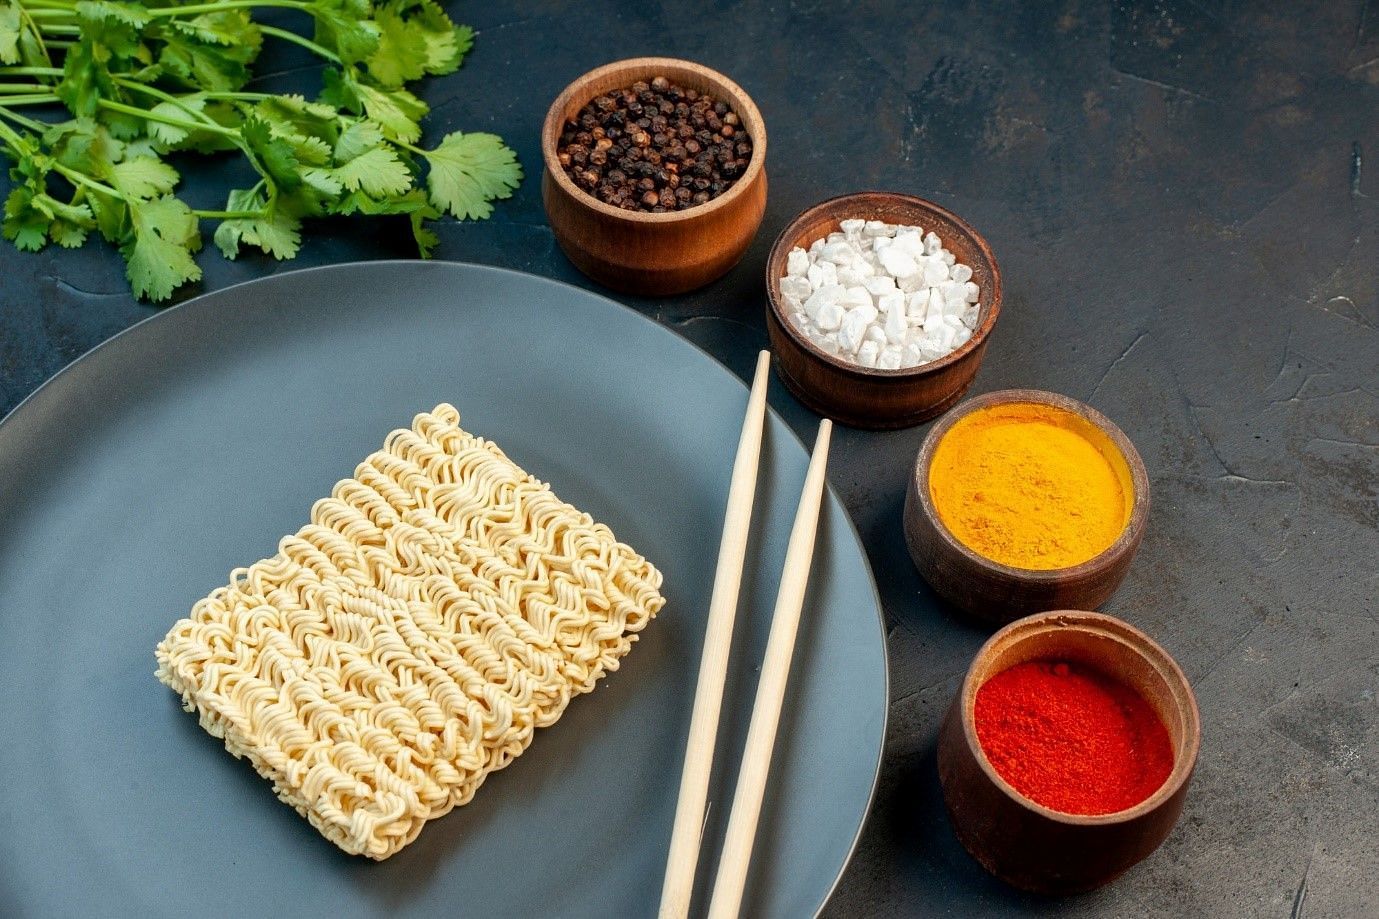 The seasoning given with noodles has a high amount of salt and other additives (Image by KamranAydinov on Freepik)